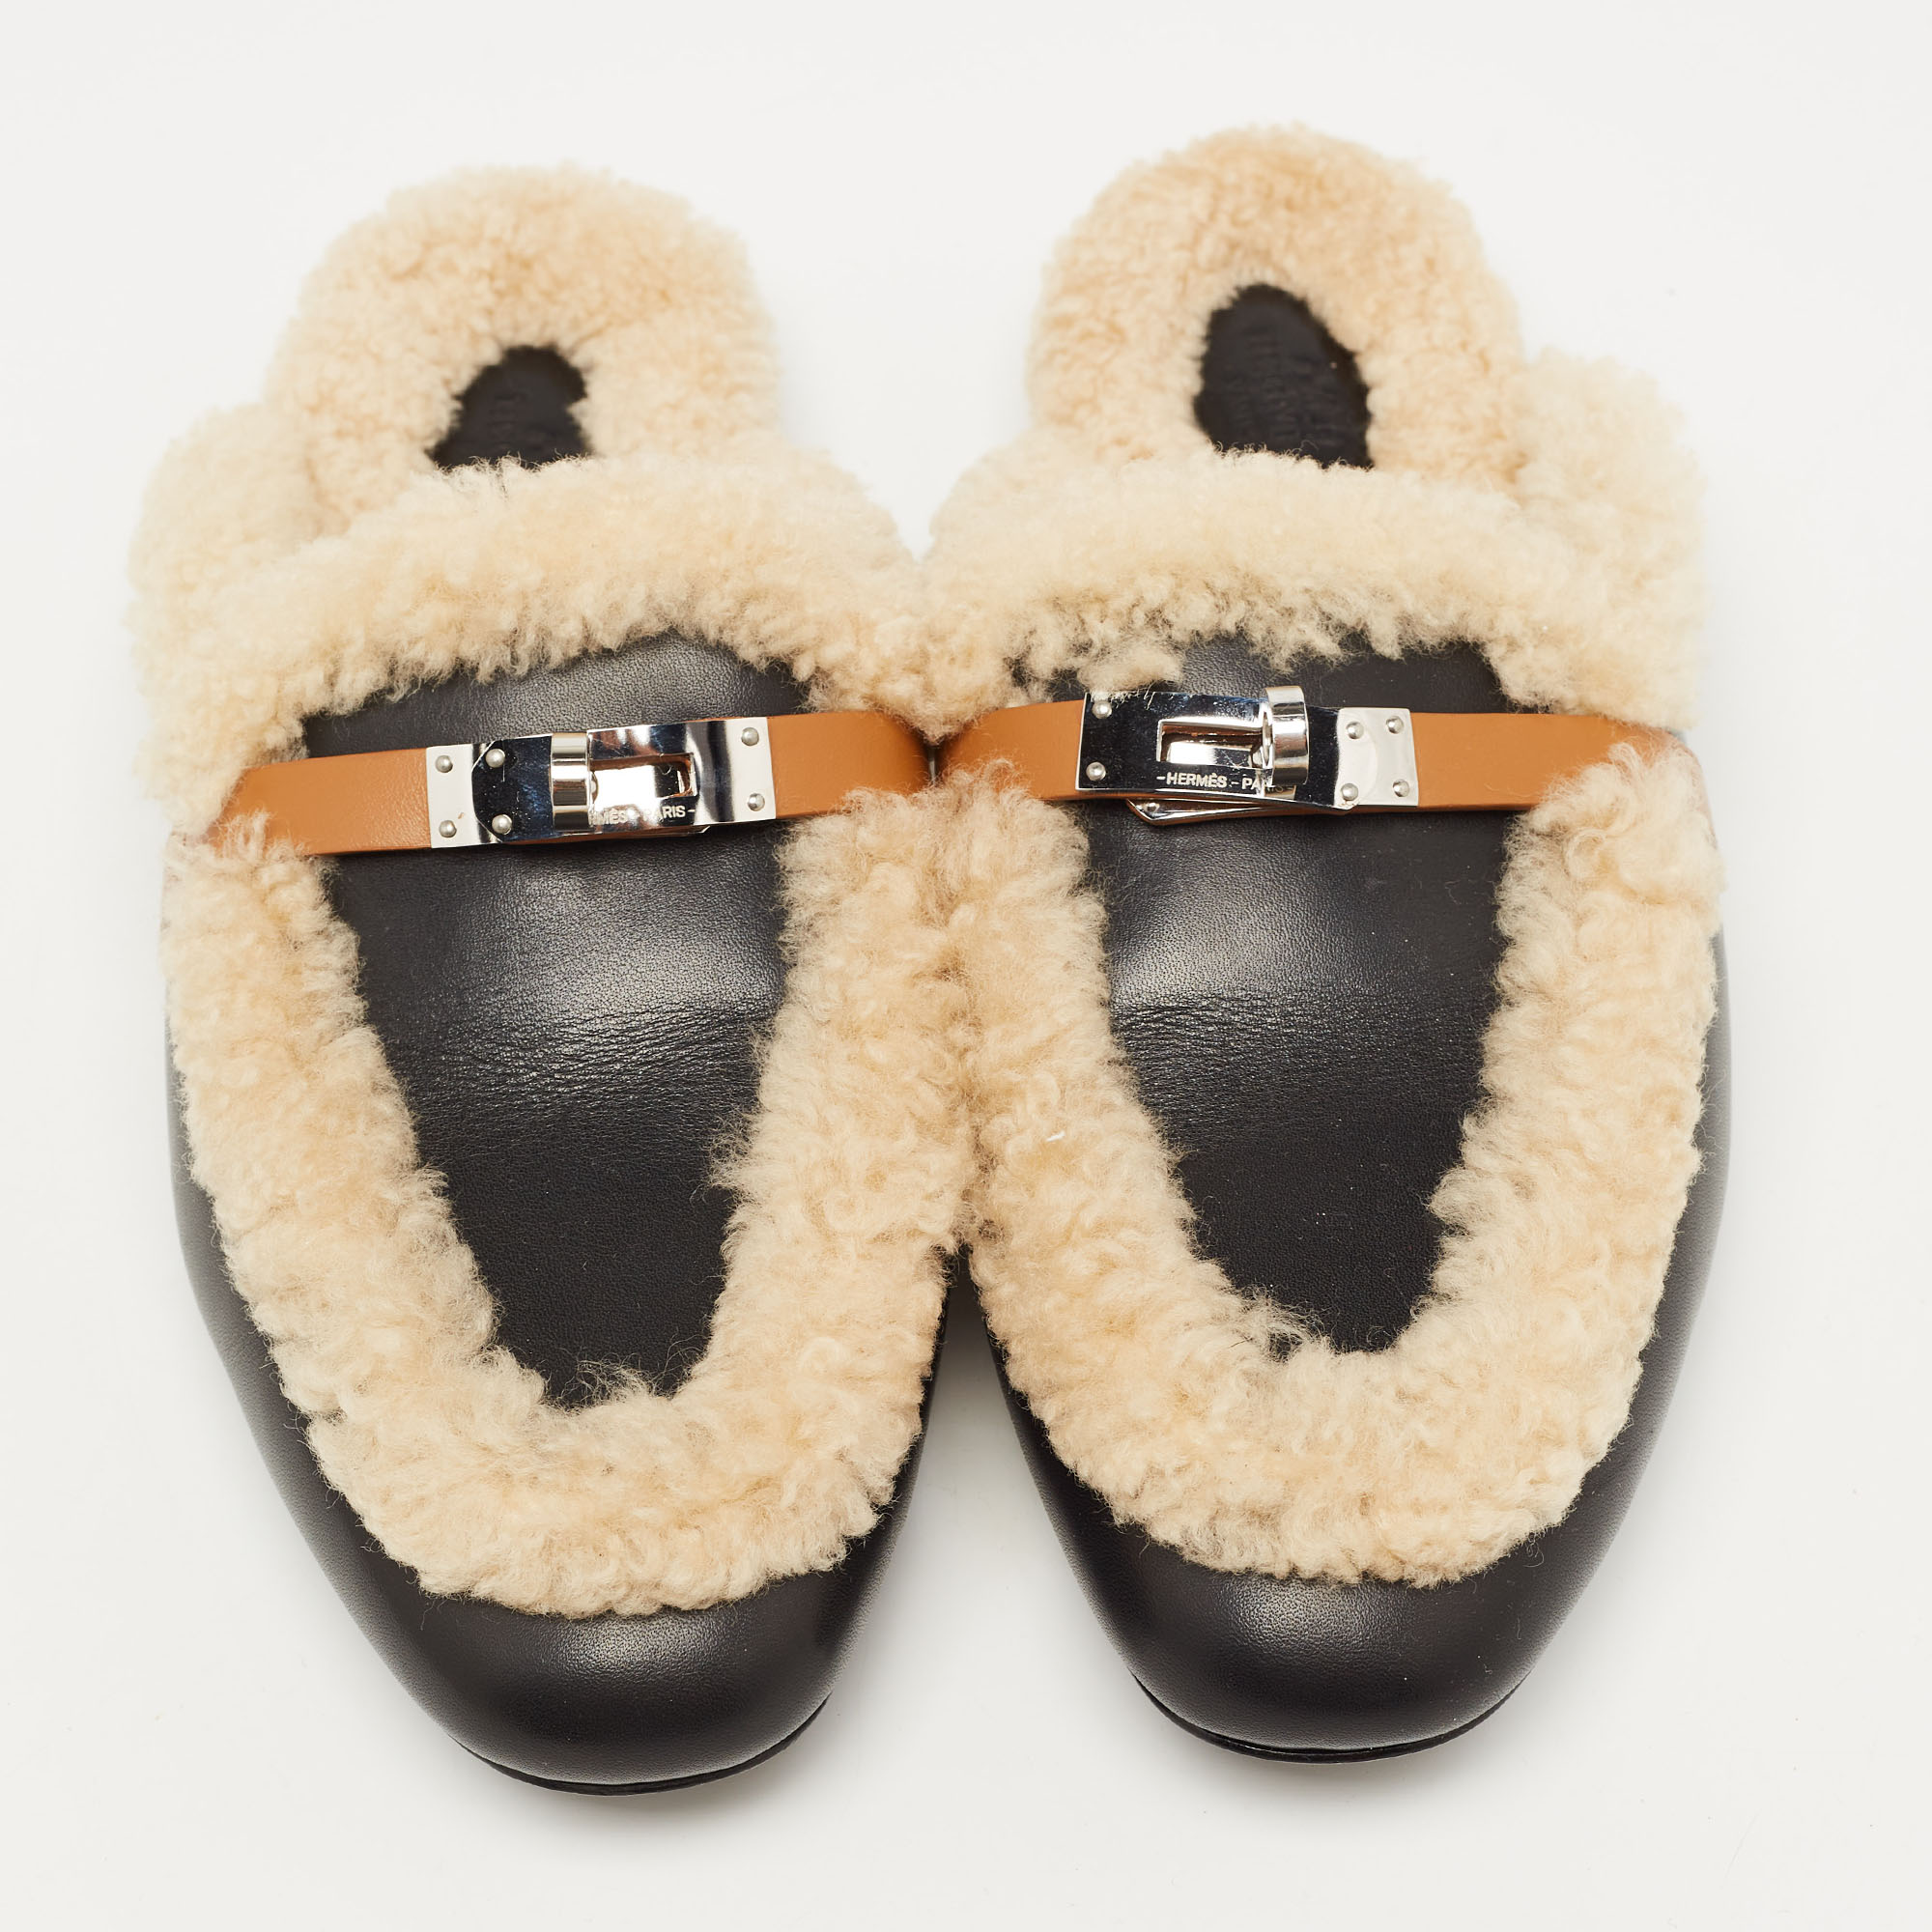 Hermes Black/Beige Leather And Shearling Fur Oz Flat Mules Size 40